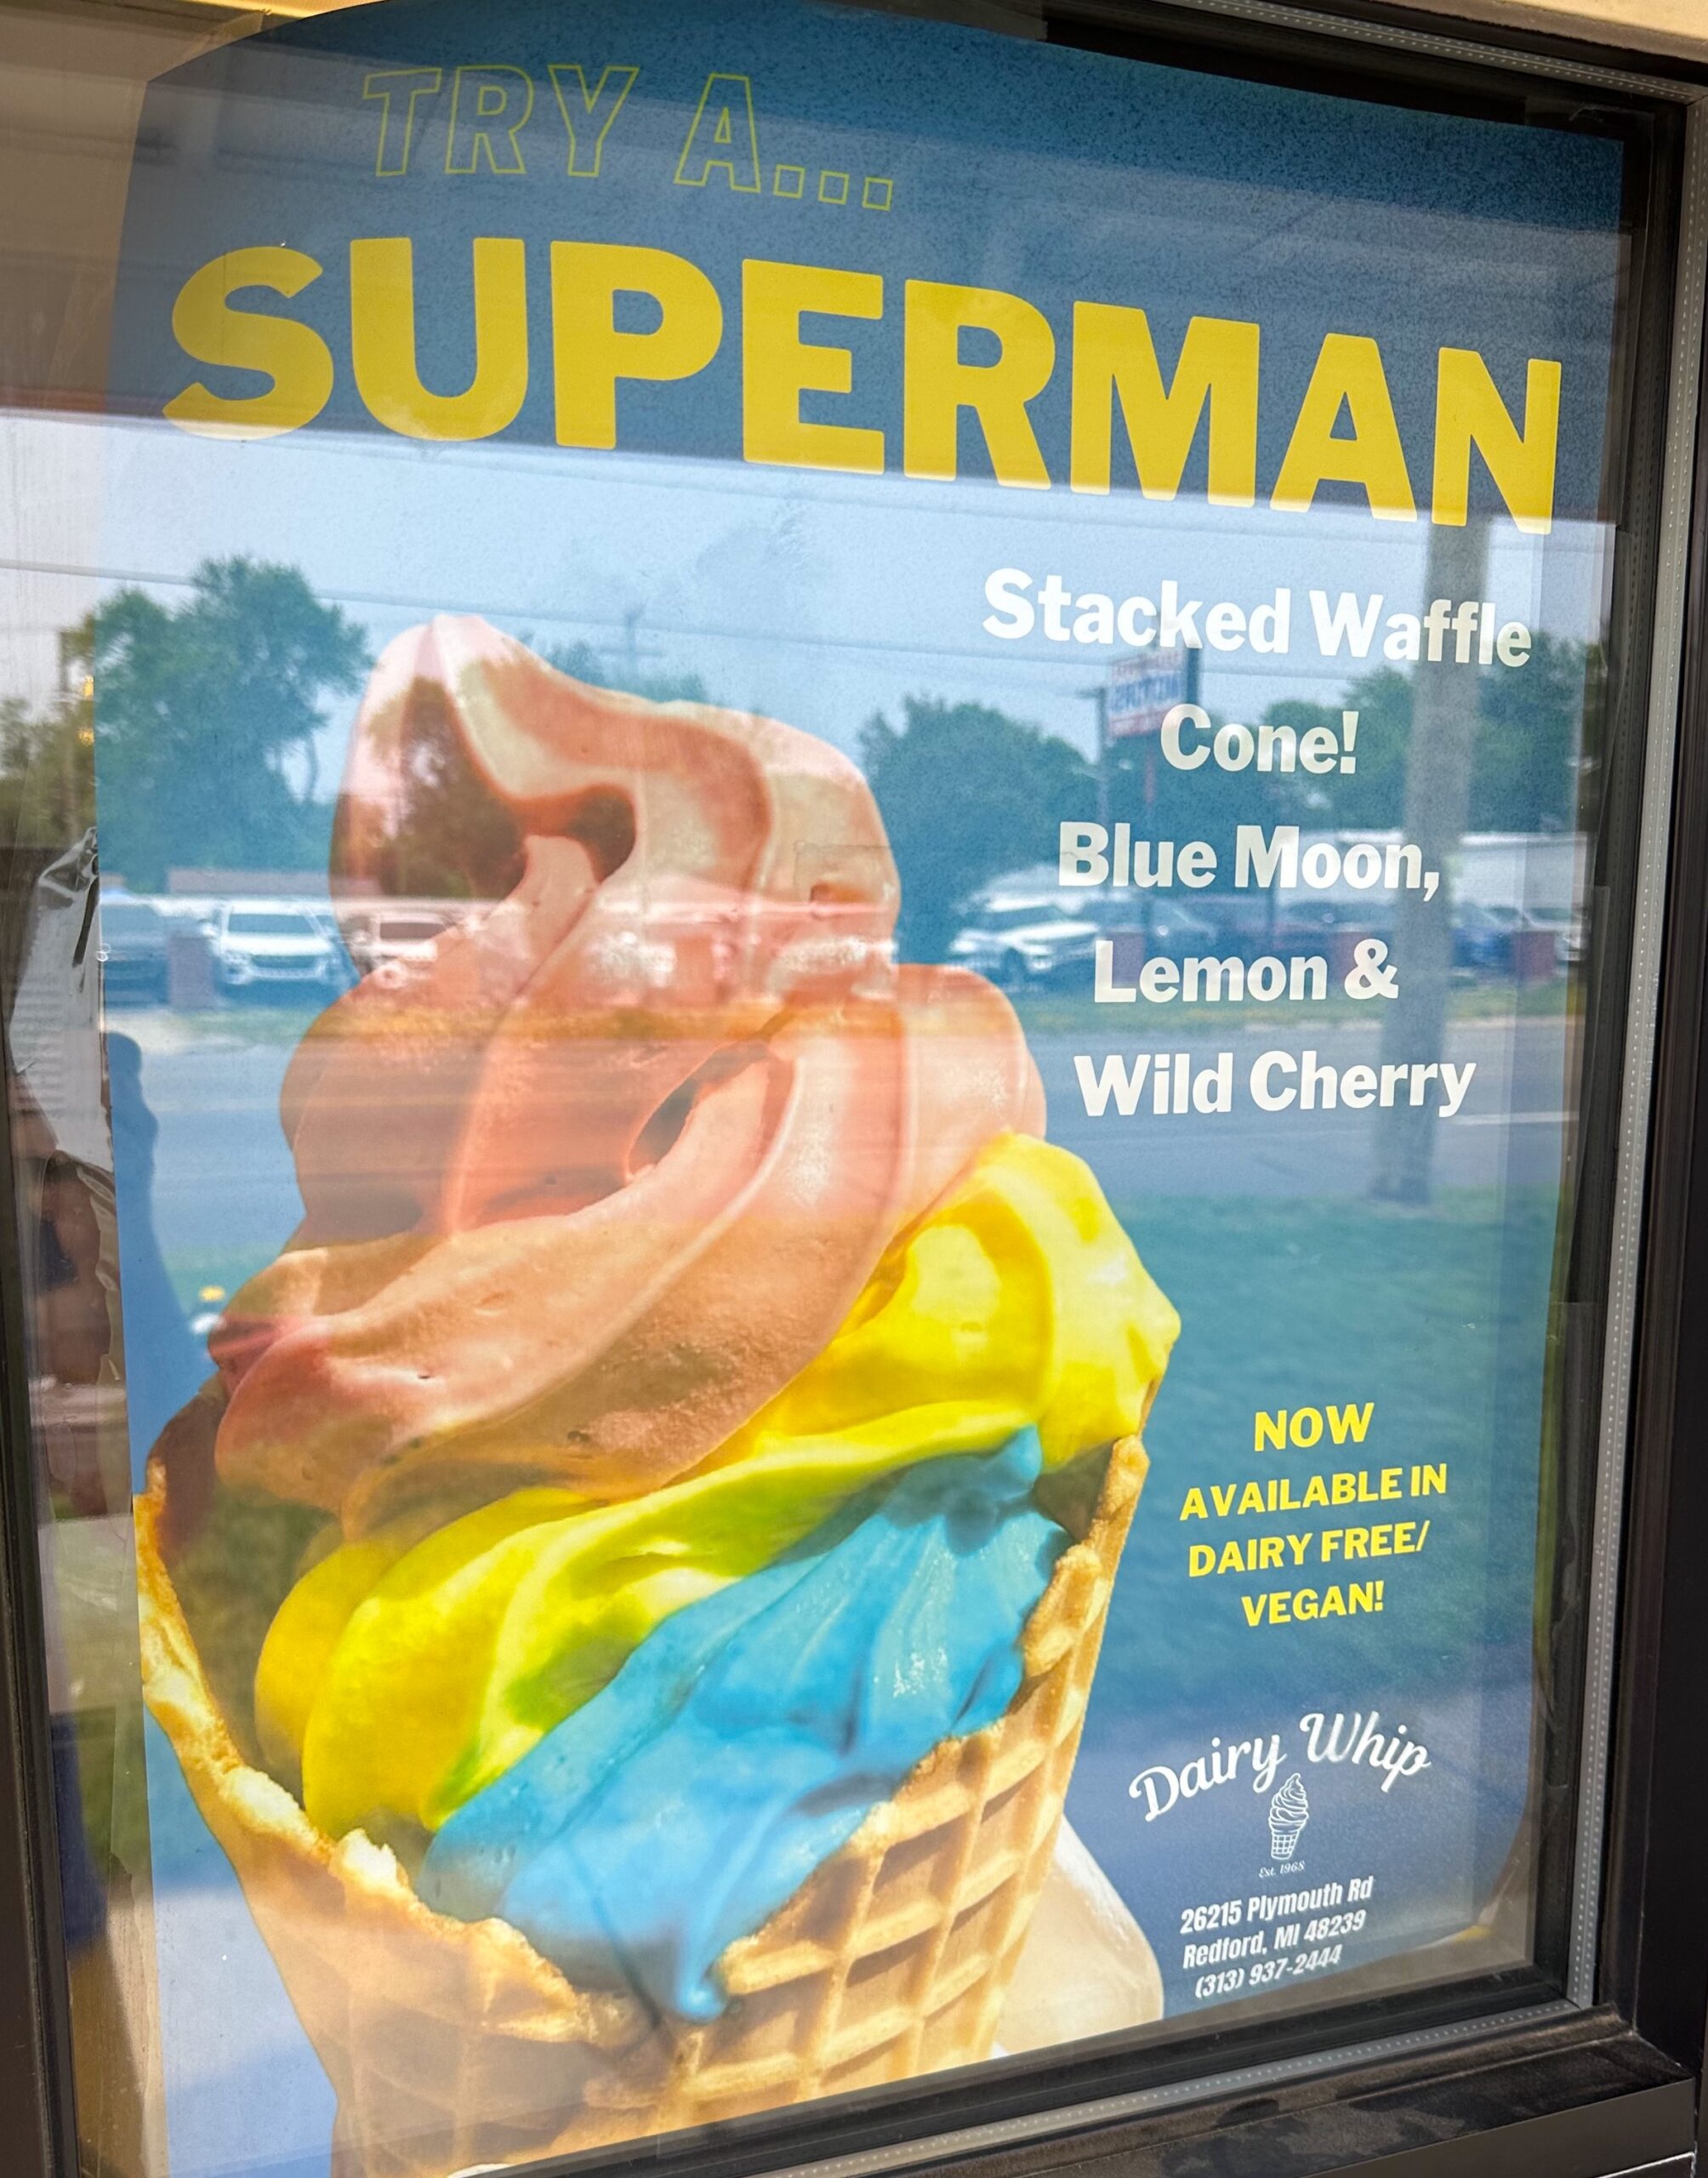 Dairy Whip offers a vegan superman flavored cone